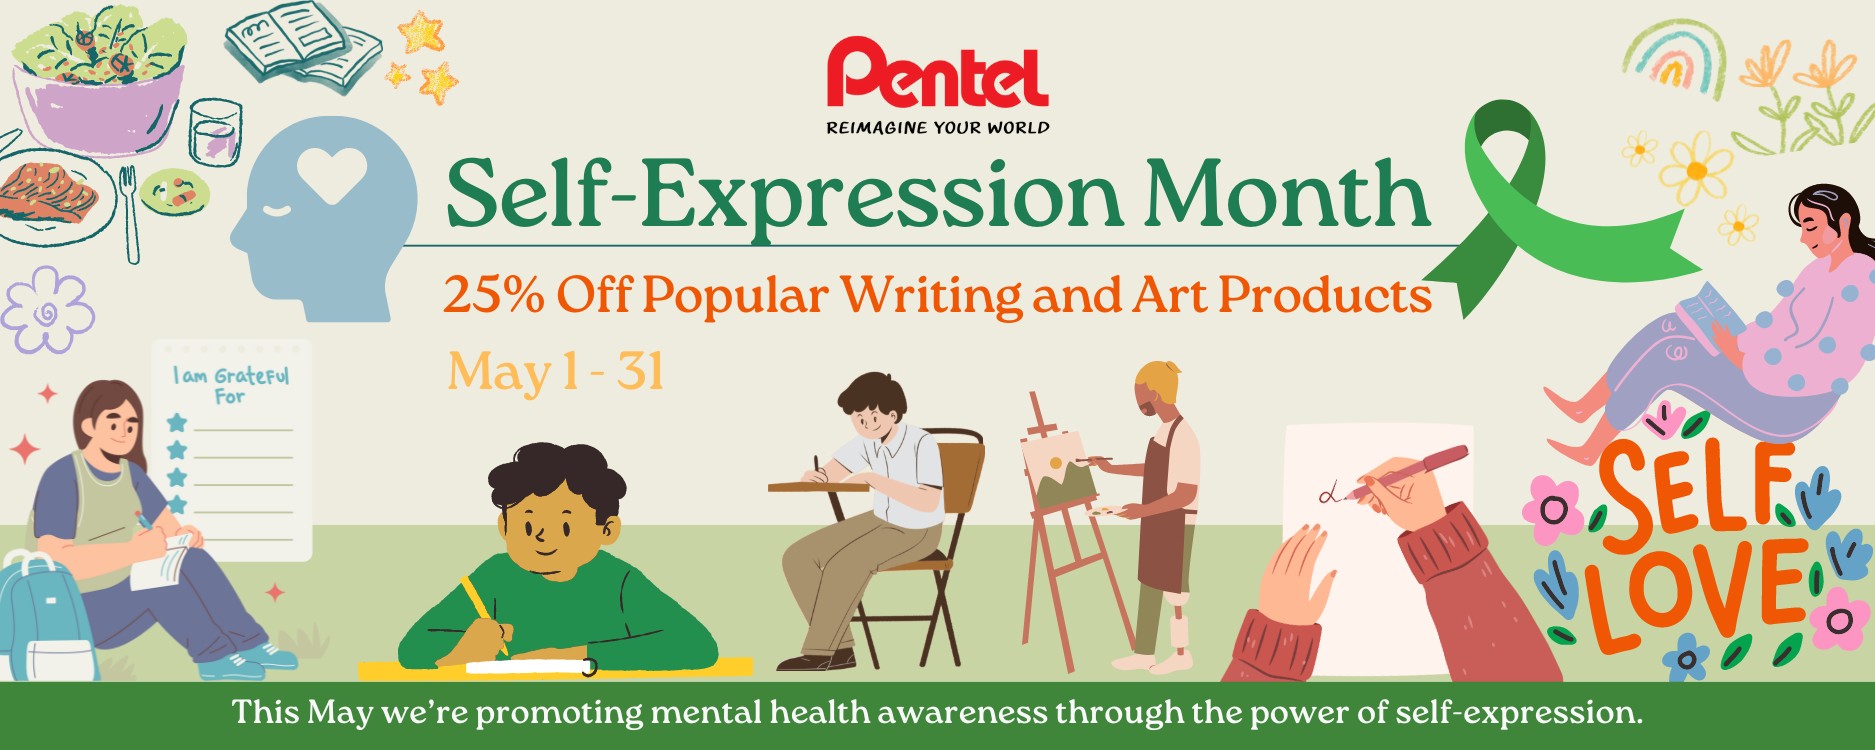 Self-Expression Month